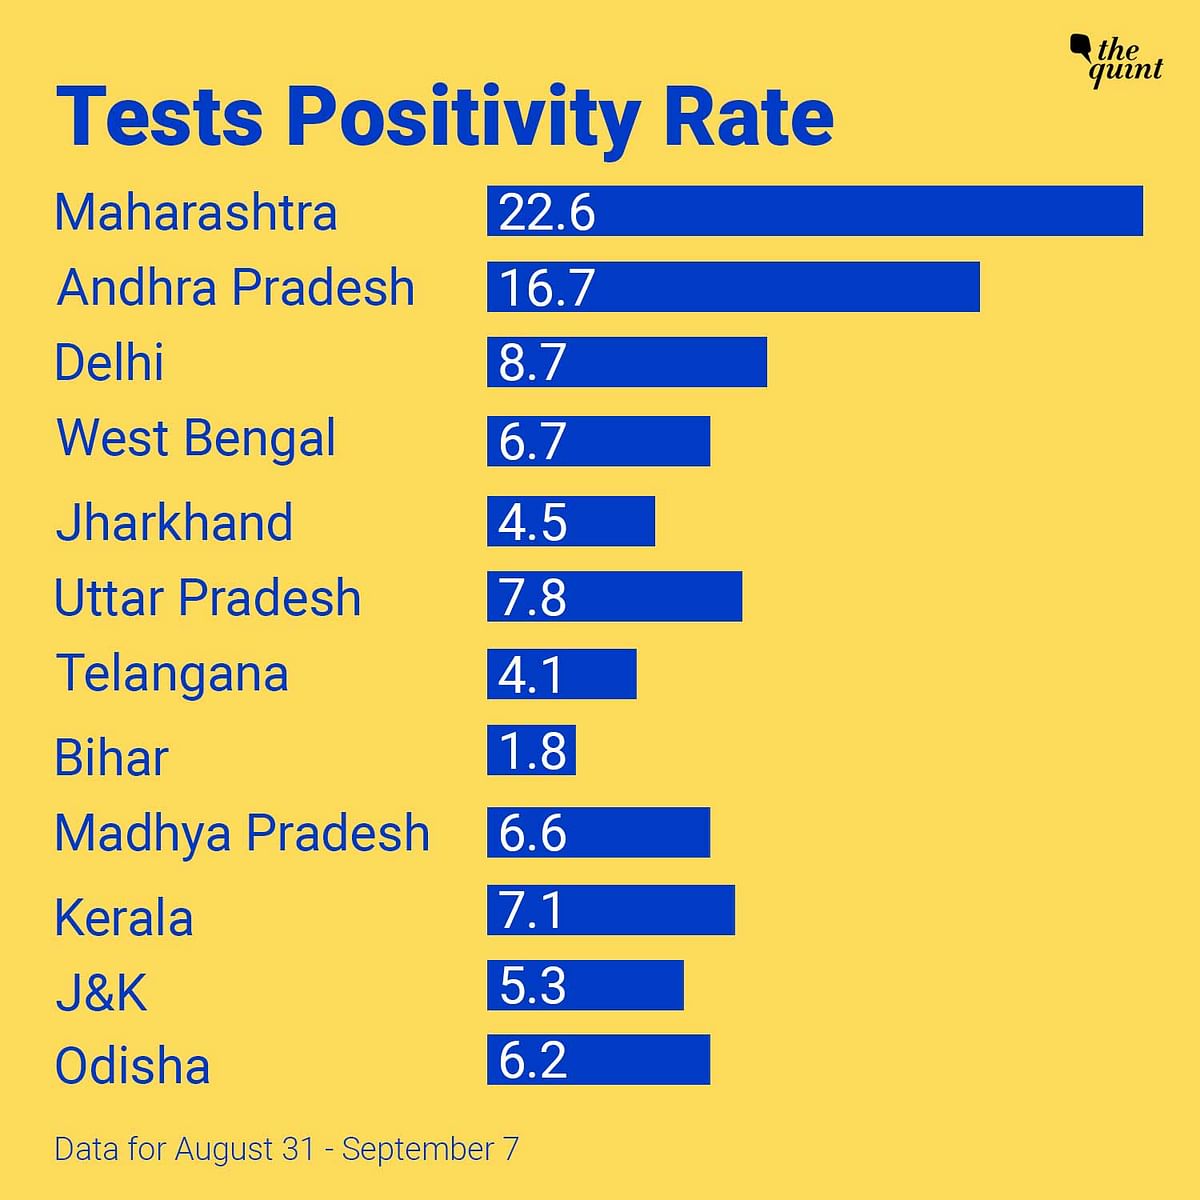 India needs to bring down its test positivity rate and tackle the spread of the infection in rural areas. 